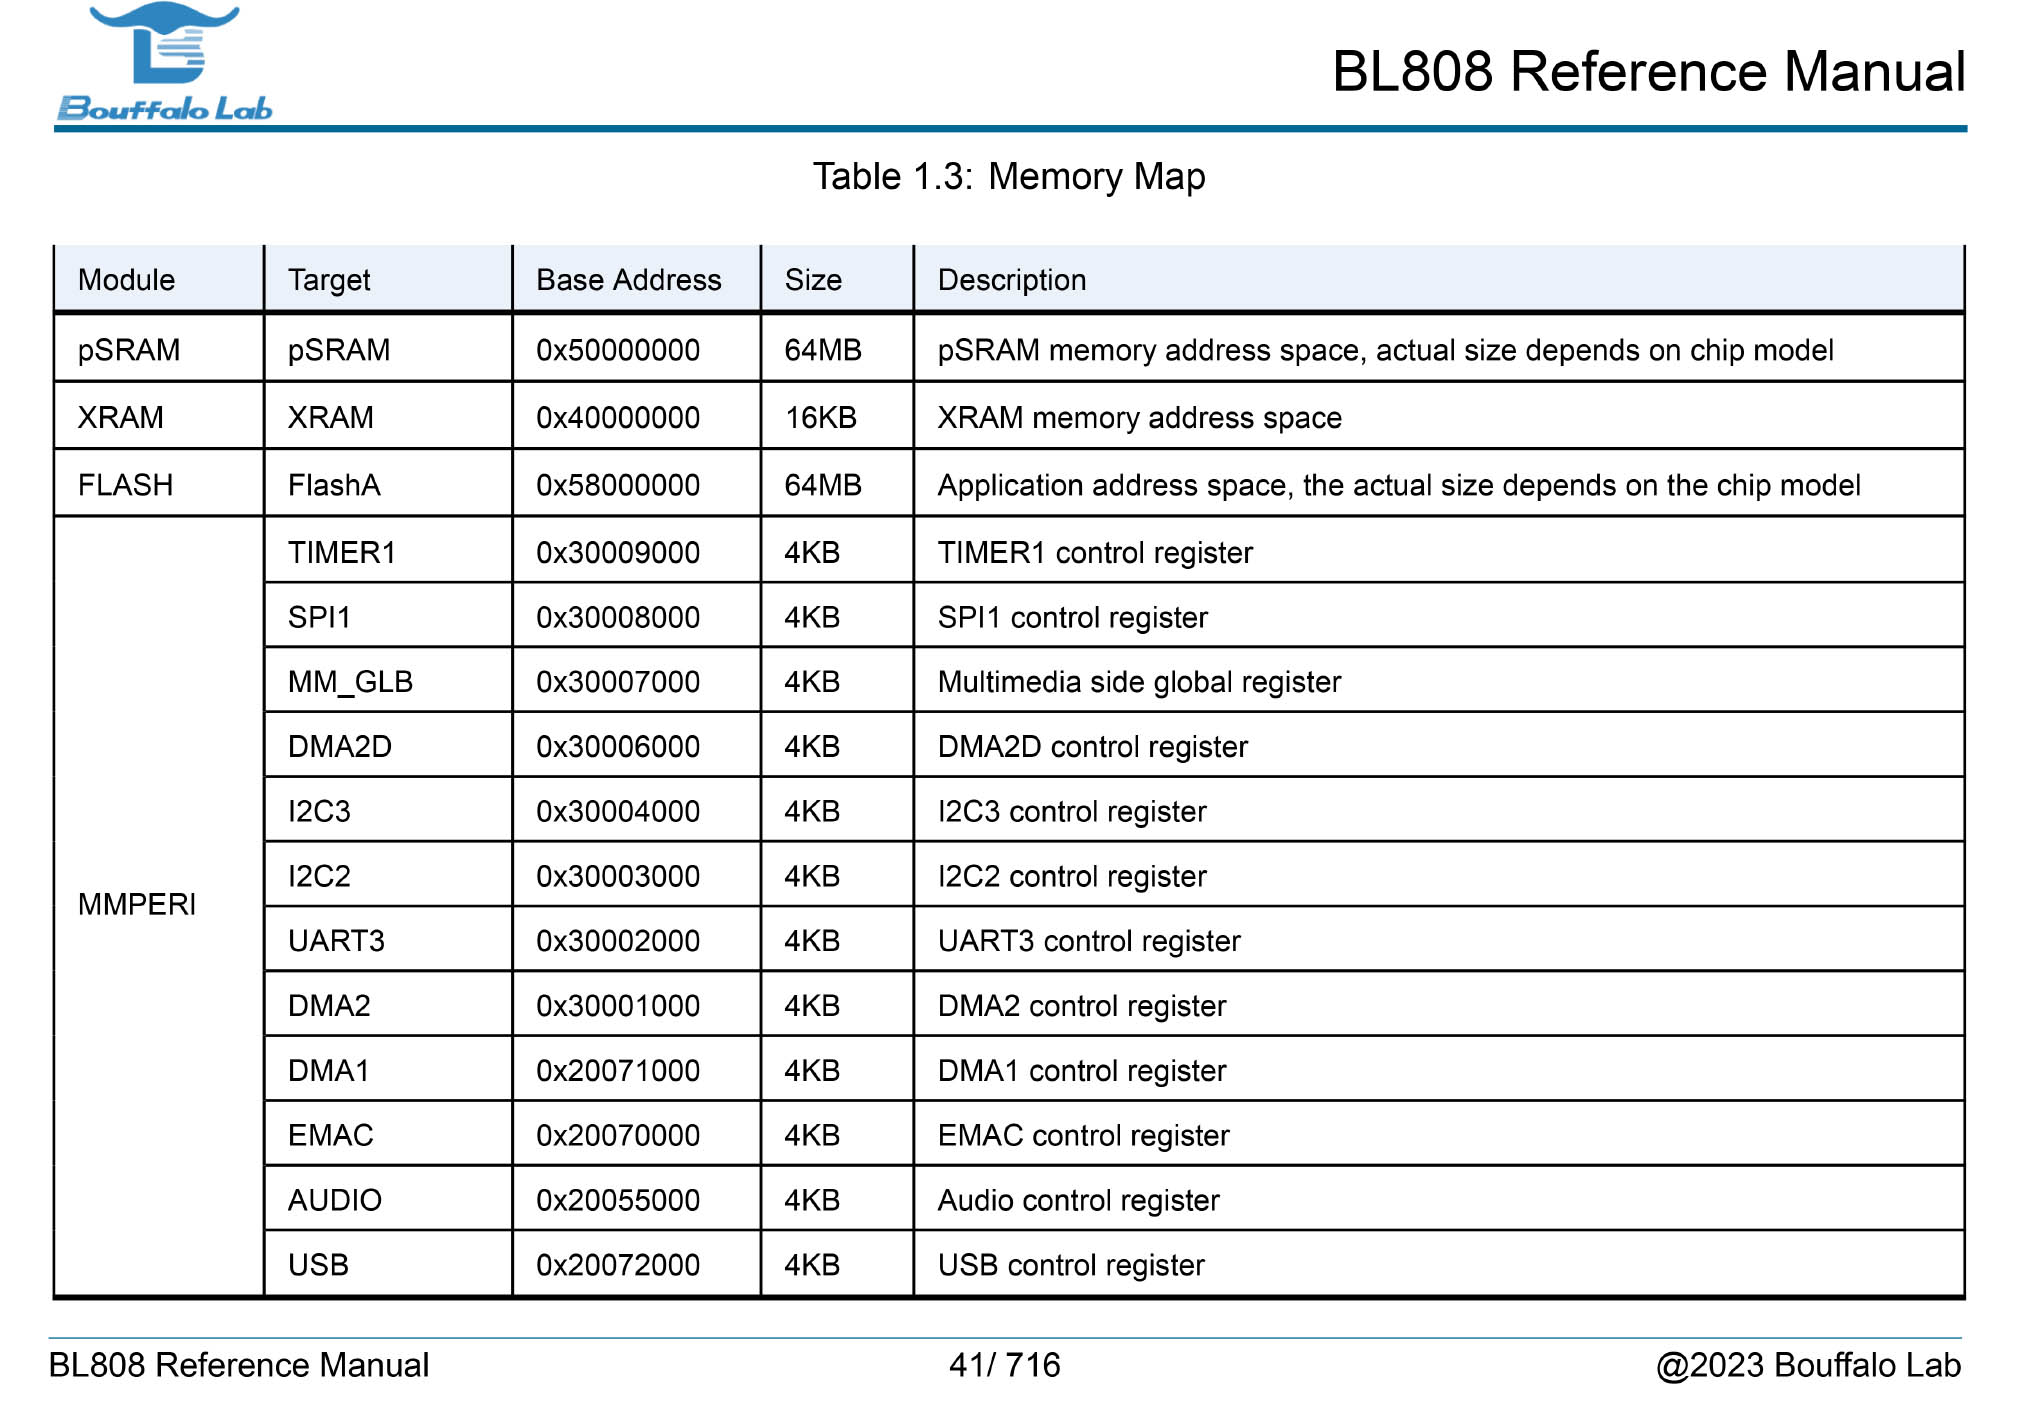 BL808 Memory Map (Page 41)